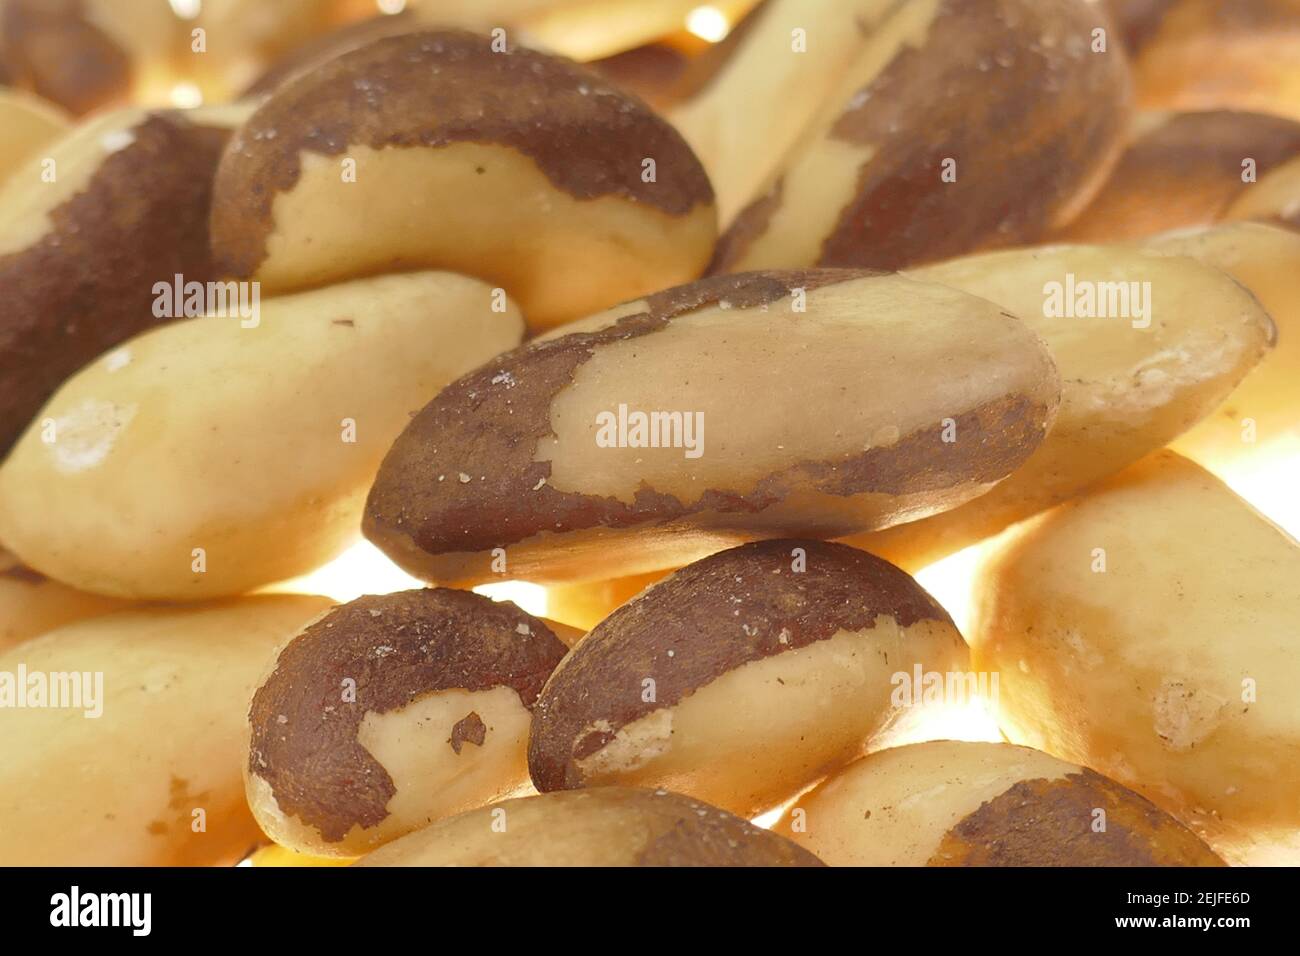 Brazil nut close-up on white background.Healthy fats. Nuts and seeds. A healthy snack. Healthy fats and proteins. Stock Photo